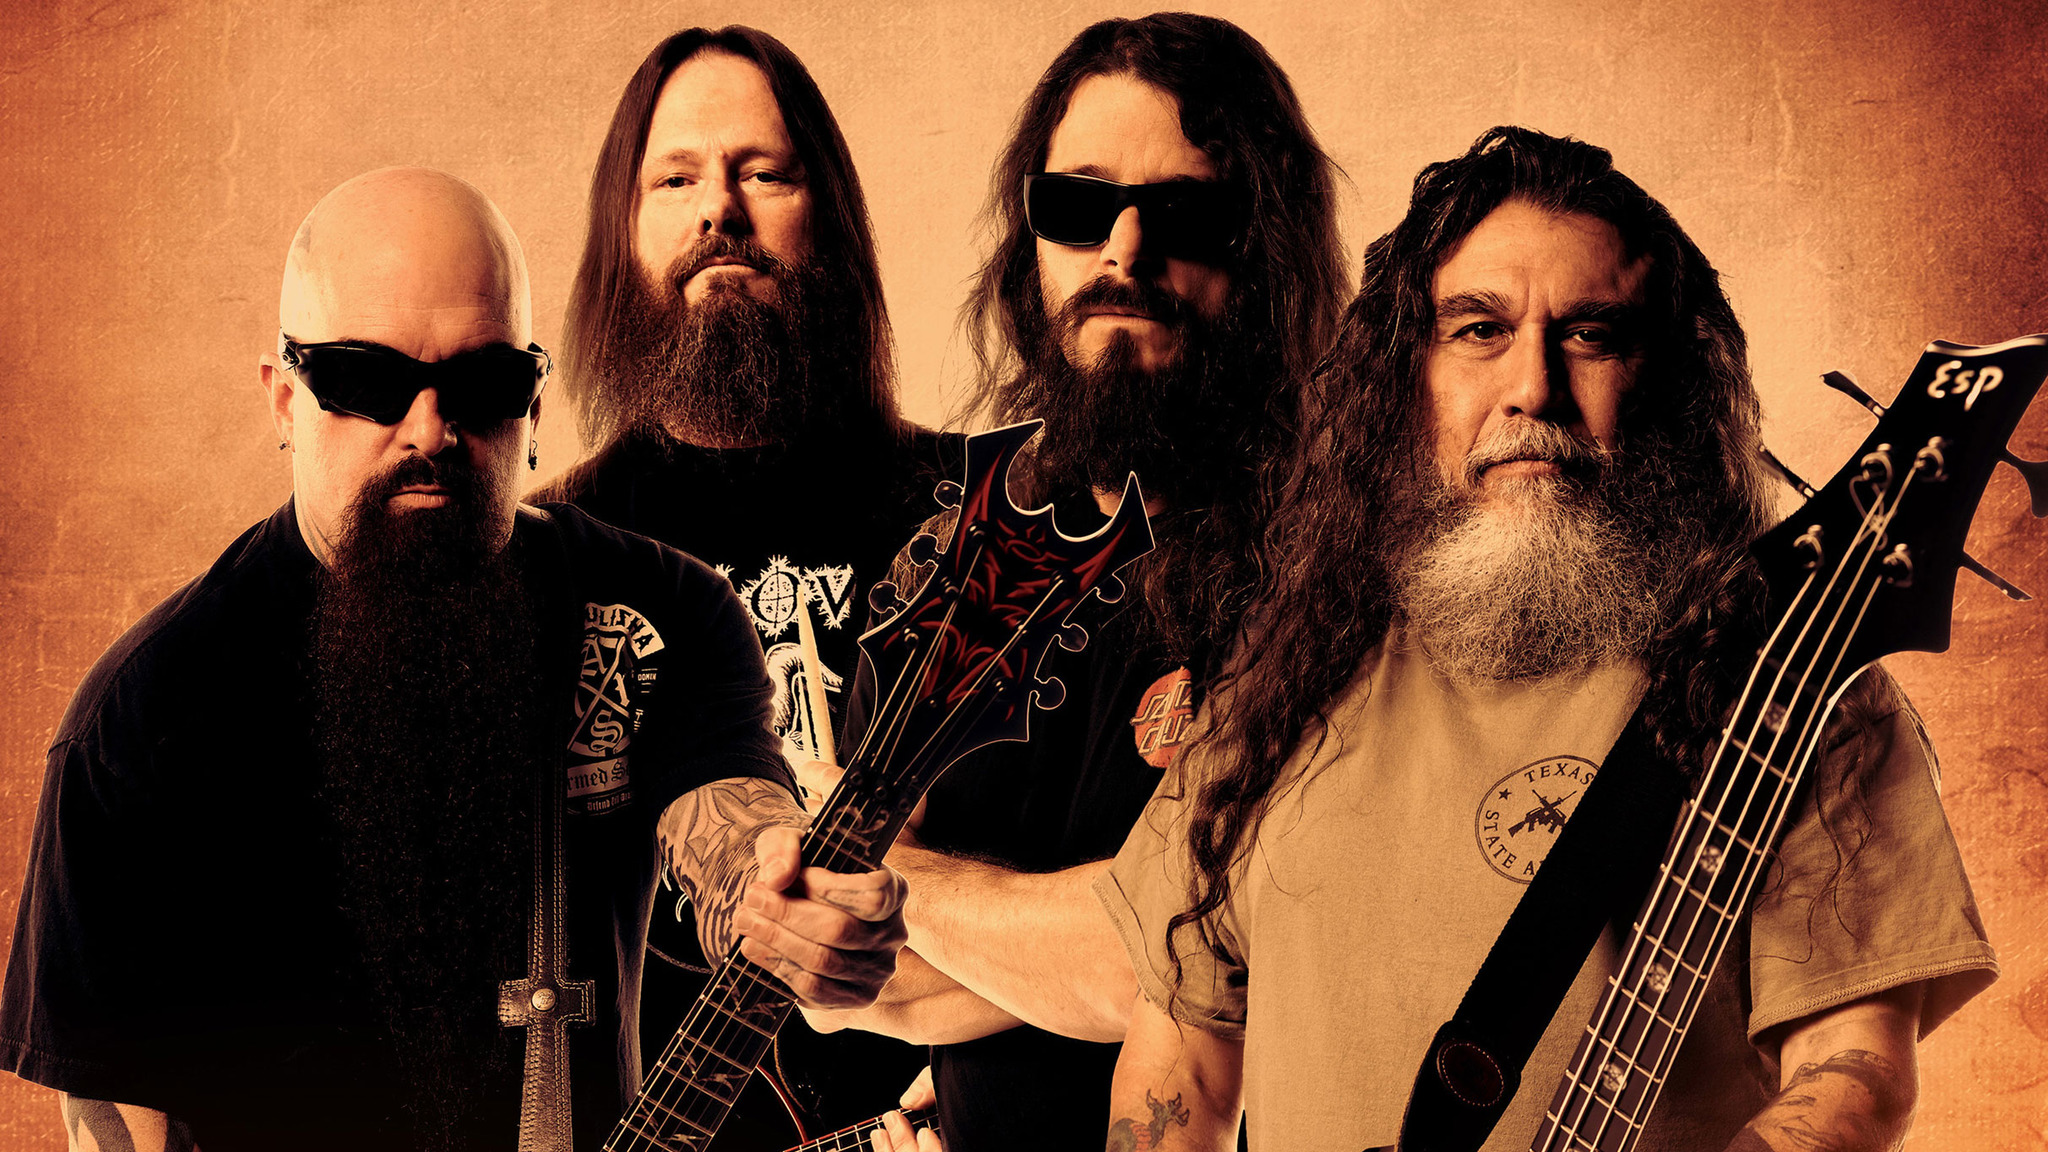 Top 5 things I want to see on the upcoming Slayer tour